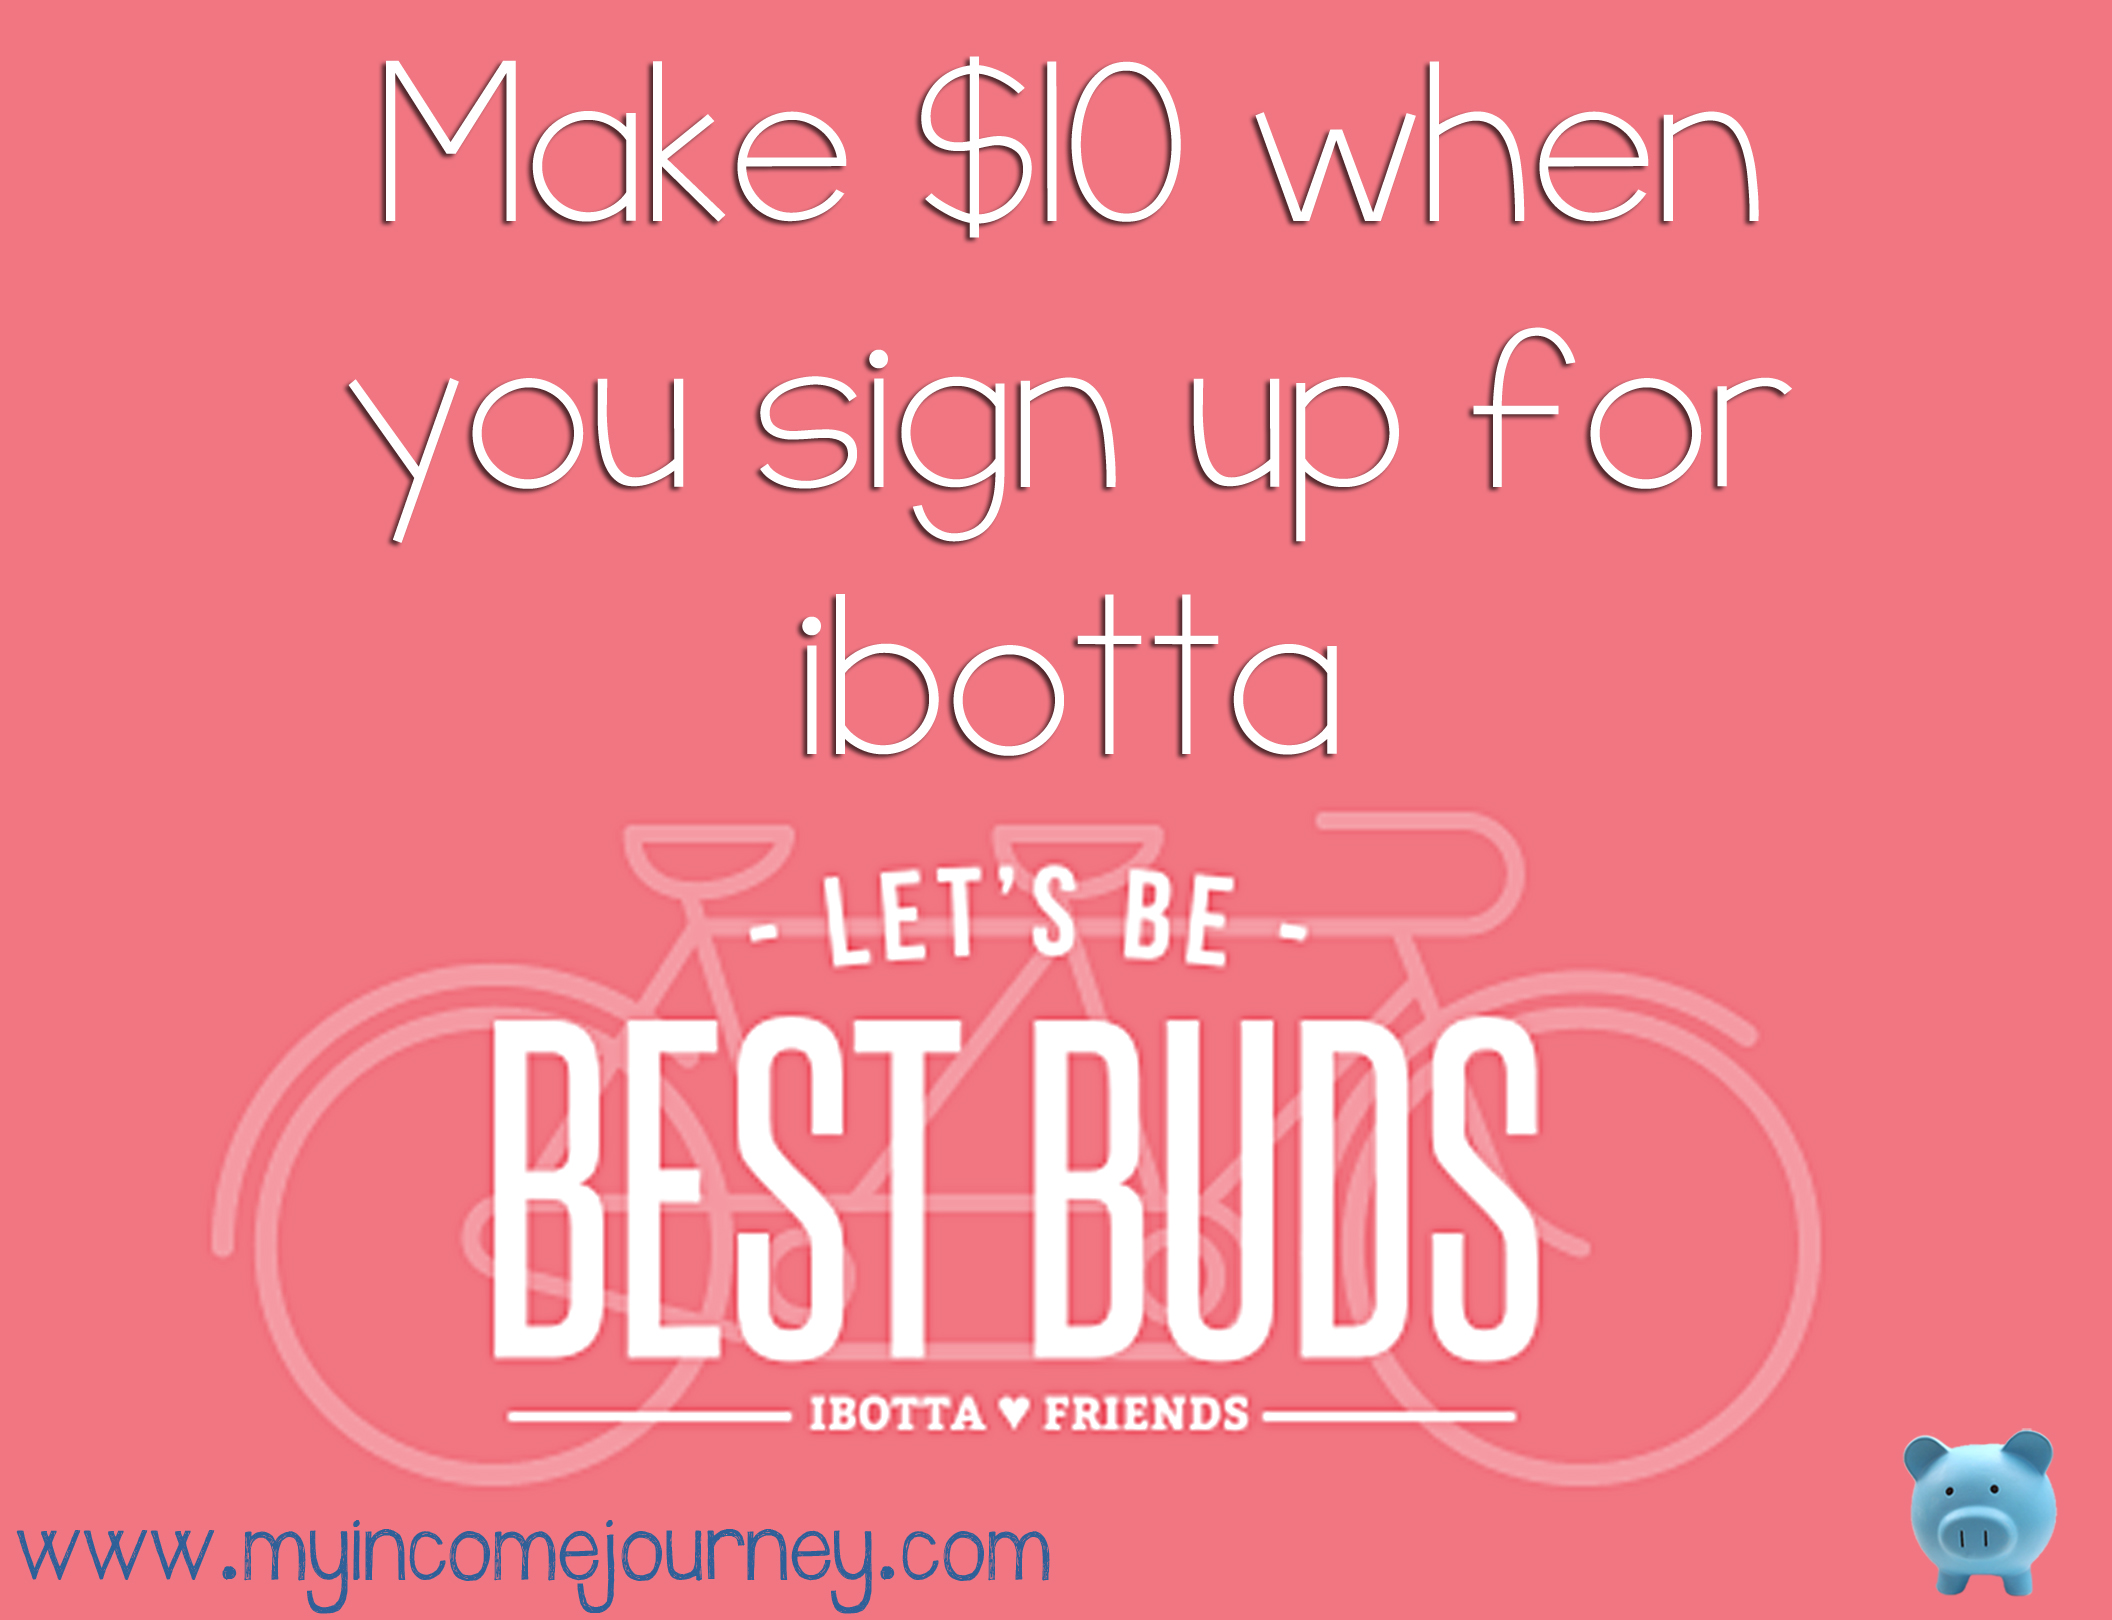 Save Money on Groceries with ibotta